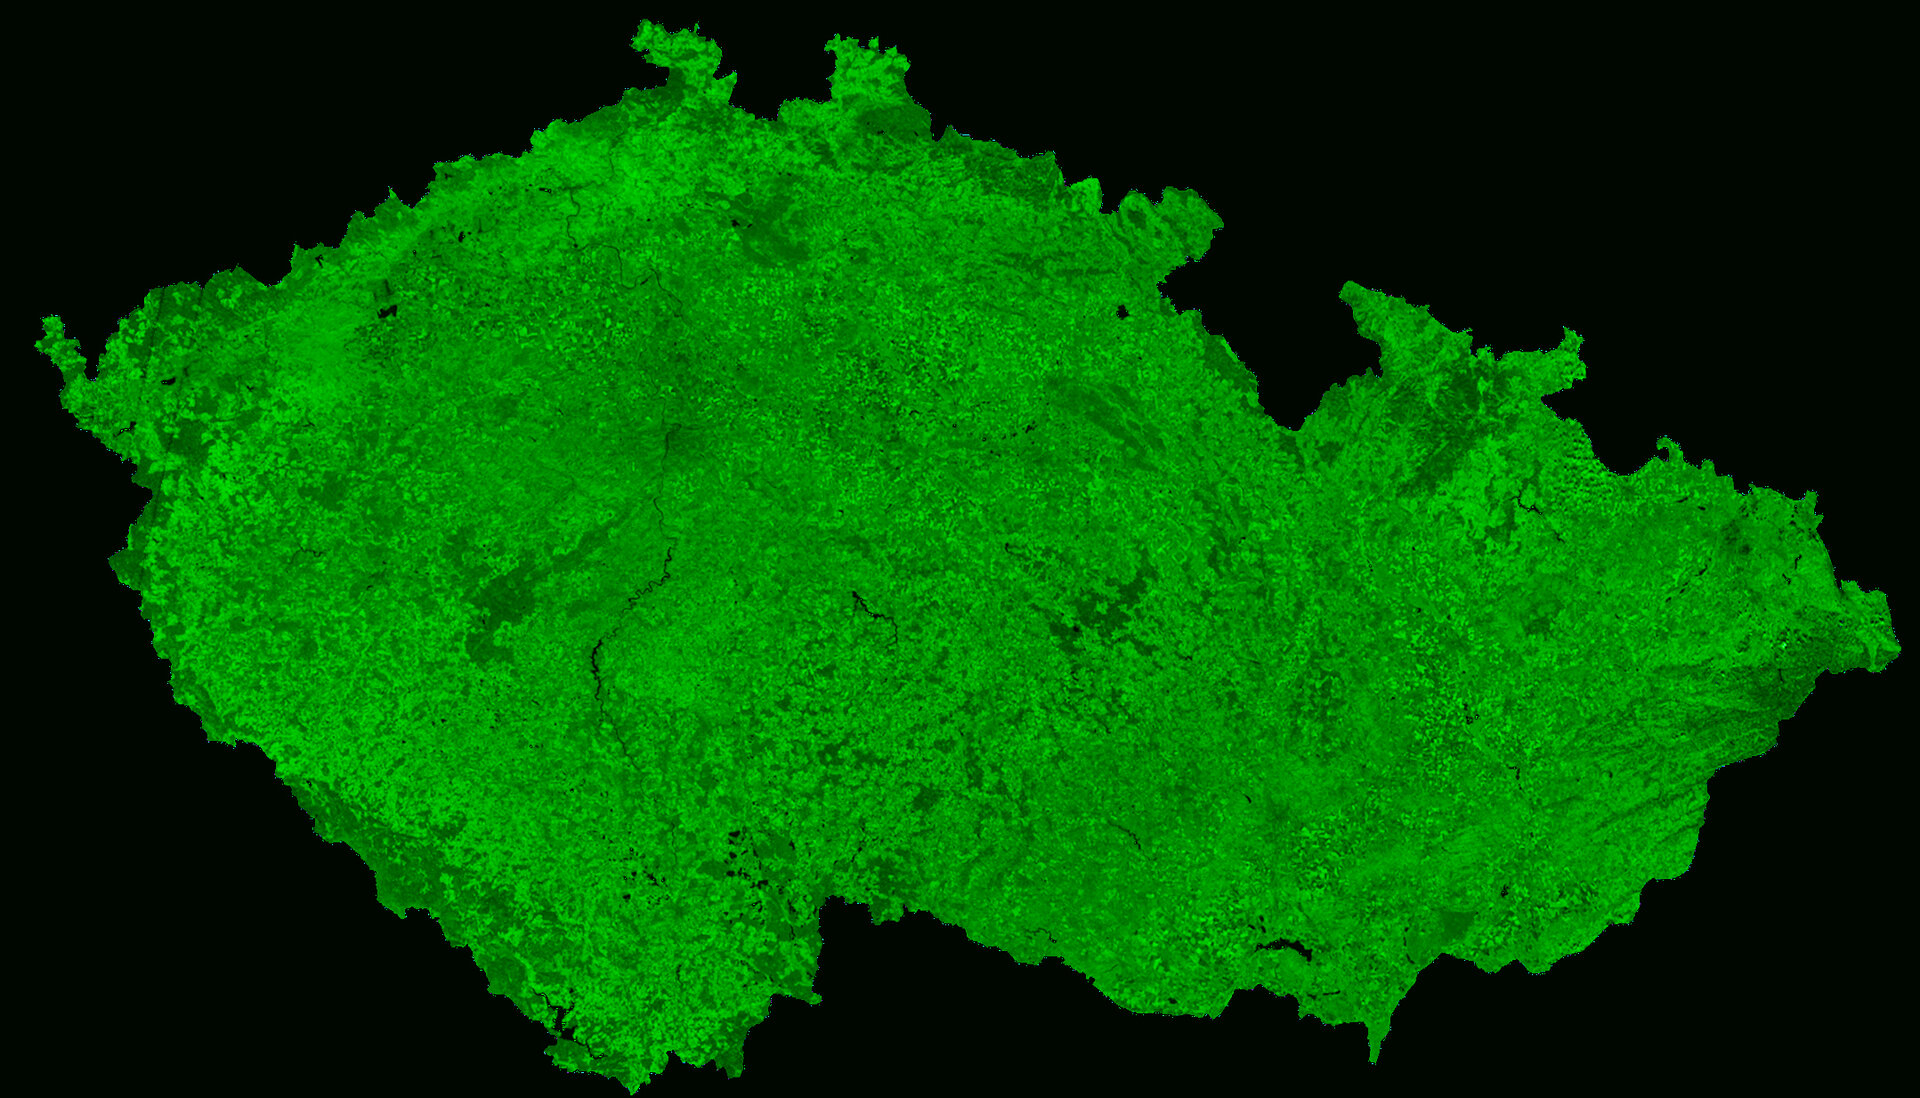 A cloud-free image of Czech Republic, acquired by ESA's Proba-V satellite